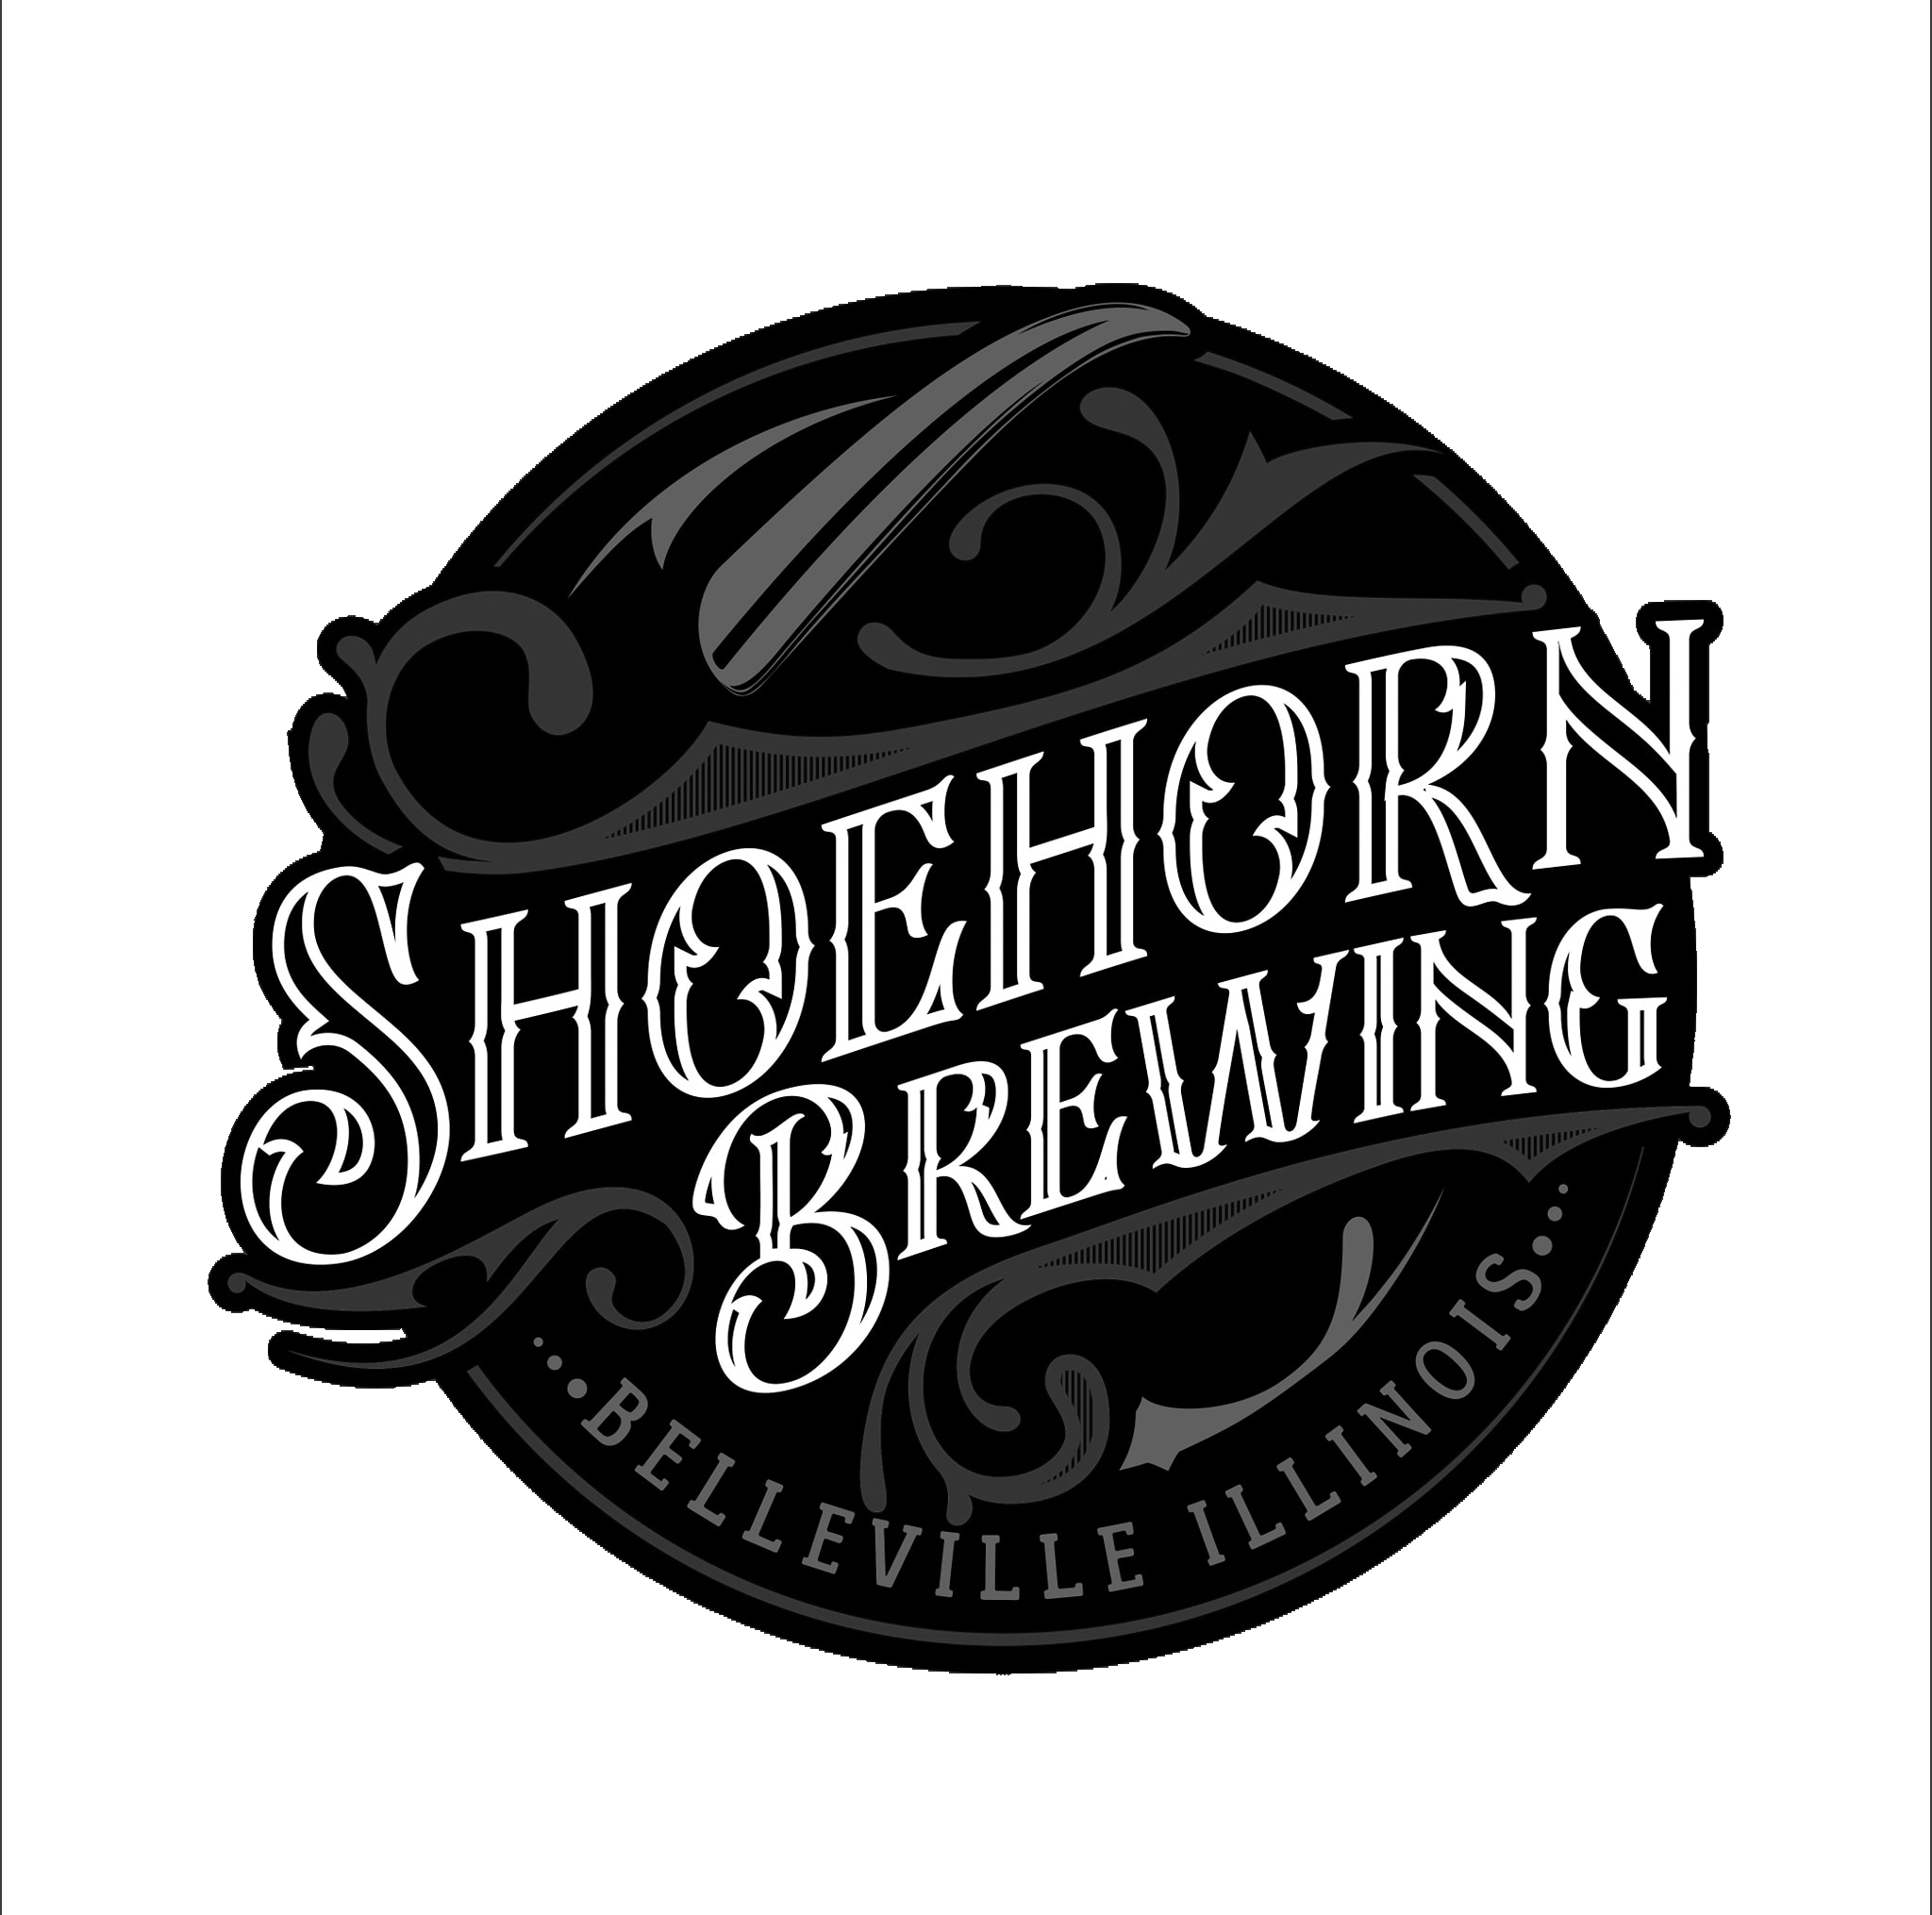 Shoehorn Brewing